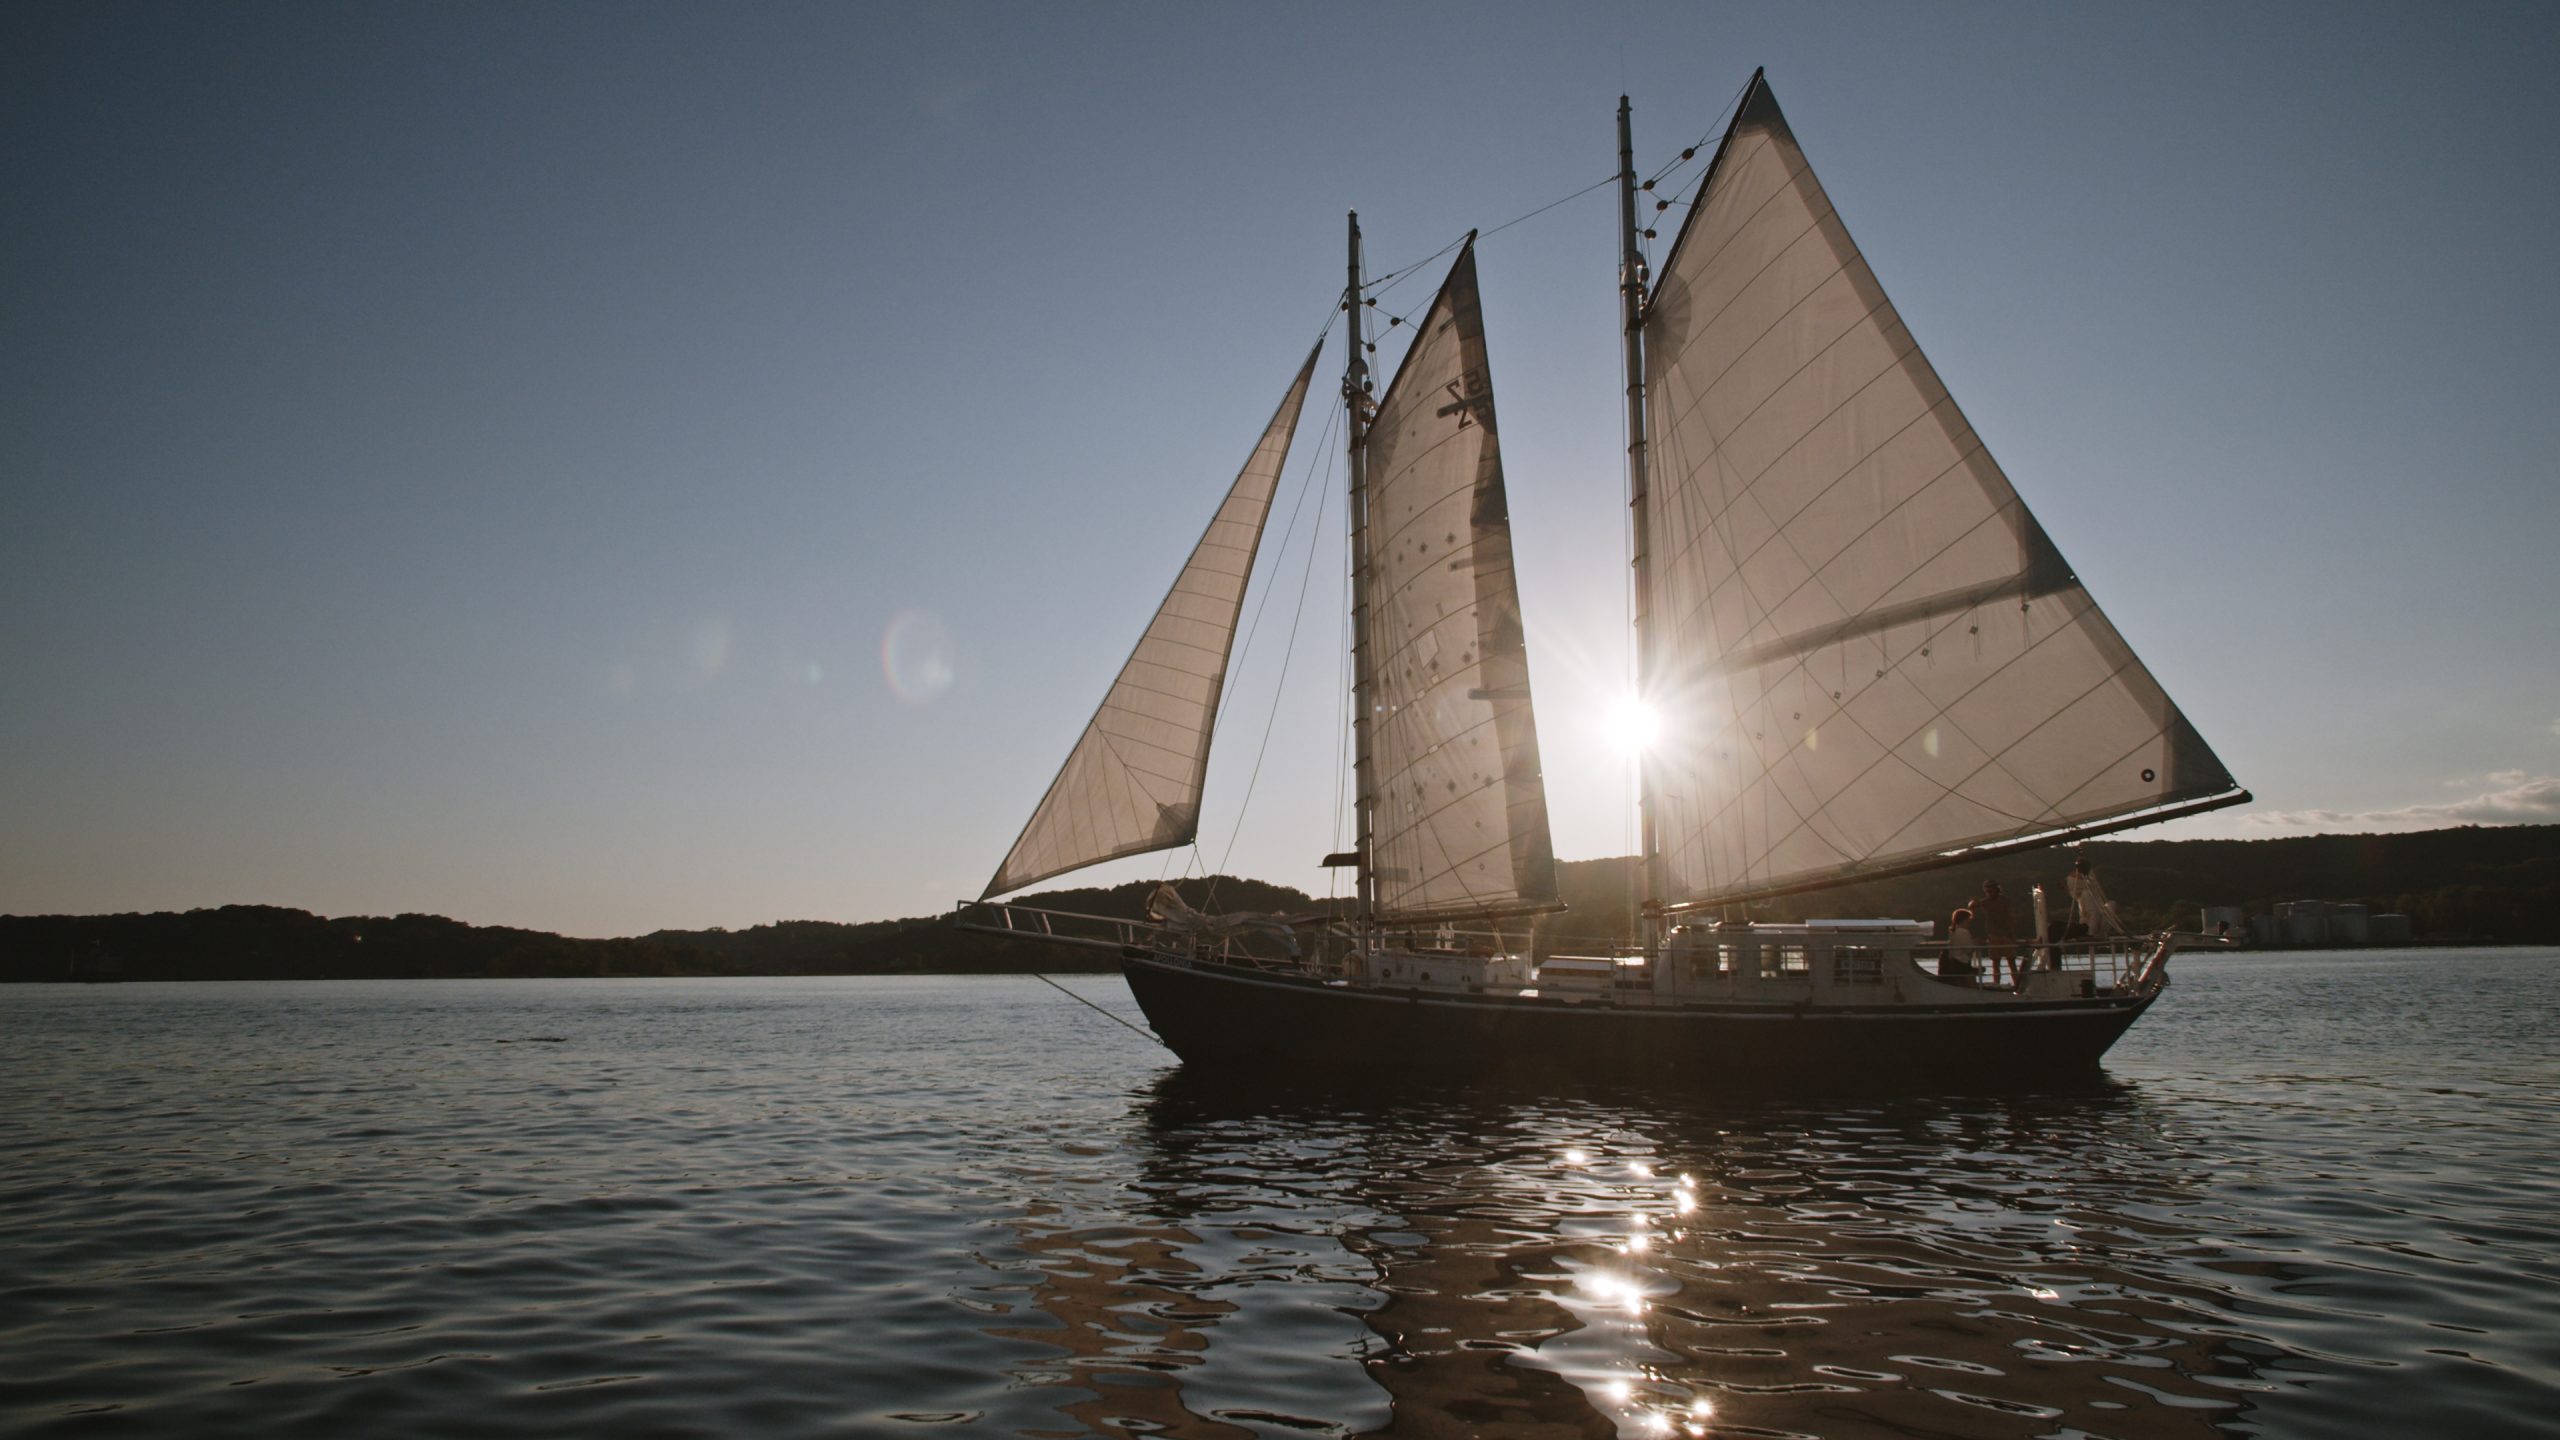 jon-bowermaster-oceans-8-films-windshipped-schooner-appollonia-fossil-fuel-sail-freight-hudson-river-nyc-top